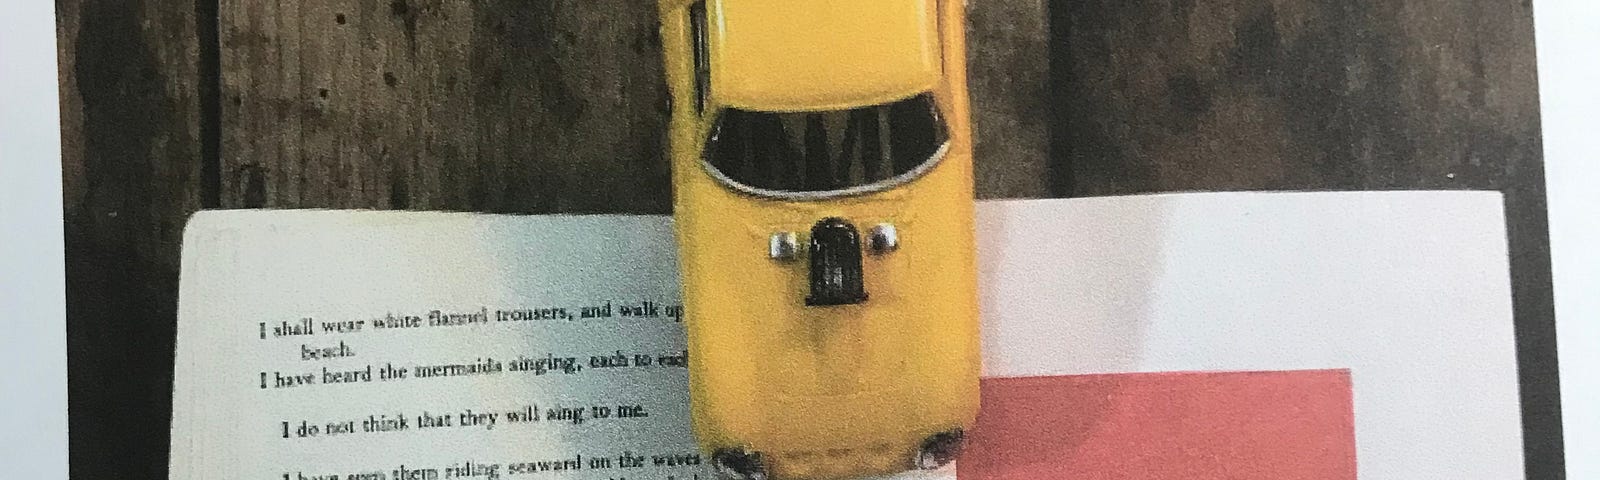 Shadowbox with yellow toy taxi, Miami Florida sign, and a page of poetry.